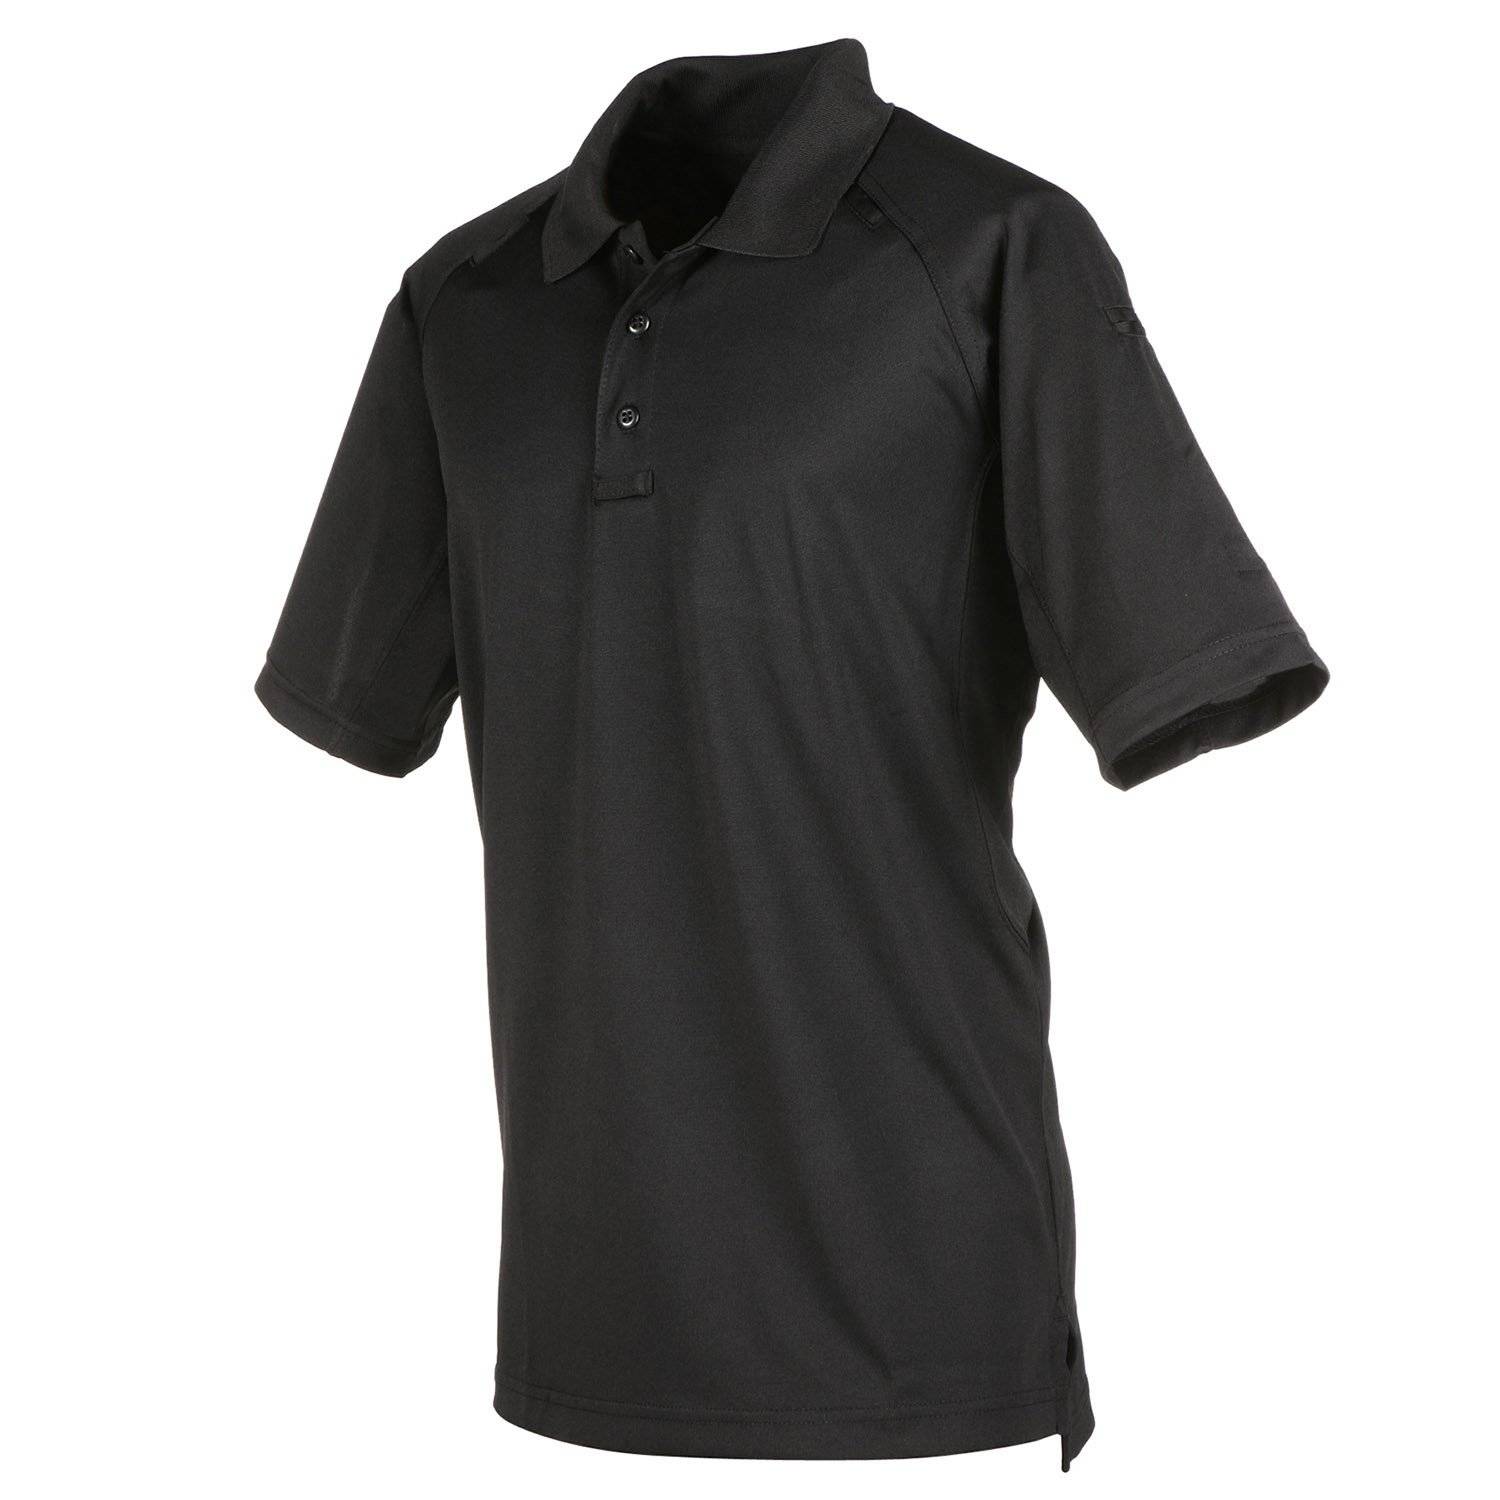 5.11 TACTICAL MEN'S SNAG-FREE PERFORMANCE SHORT SLEEVE POLO